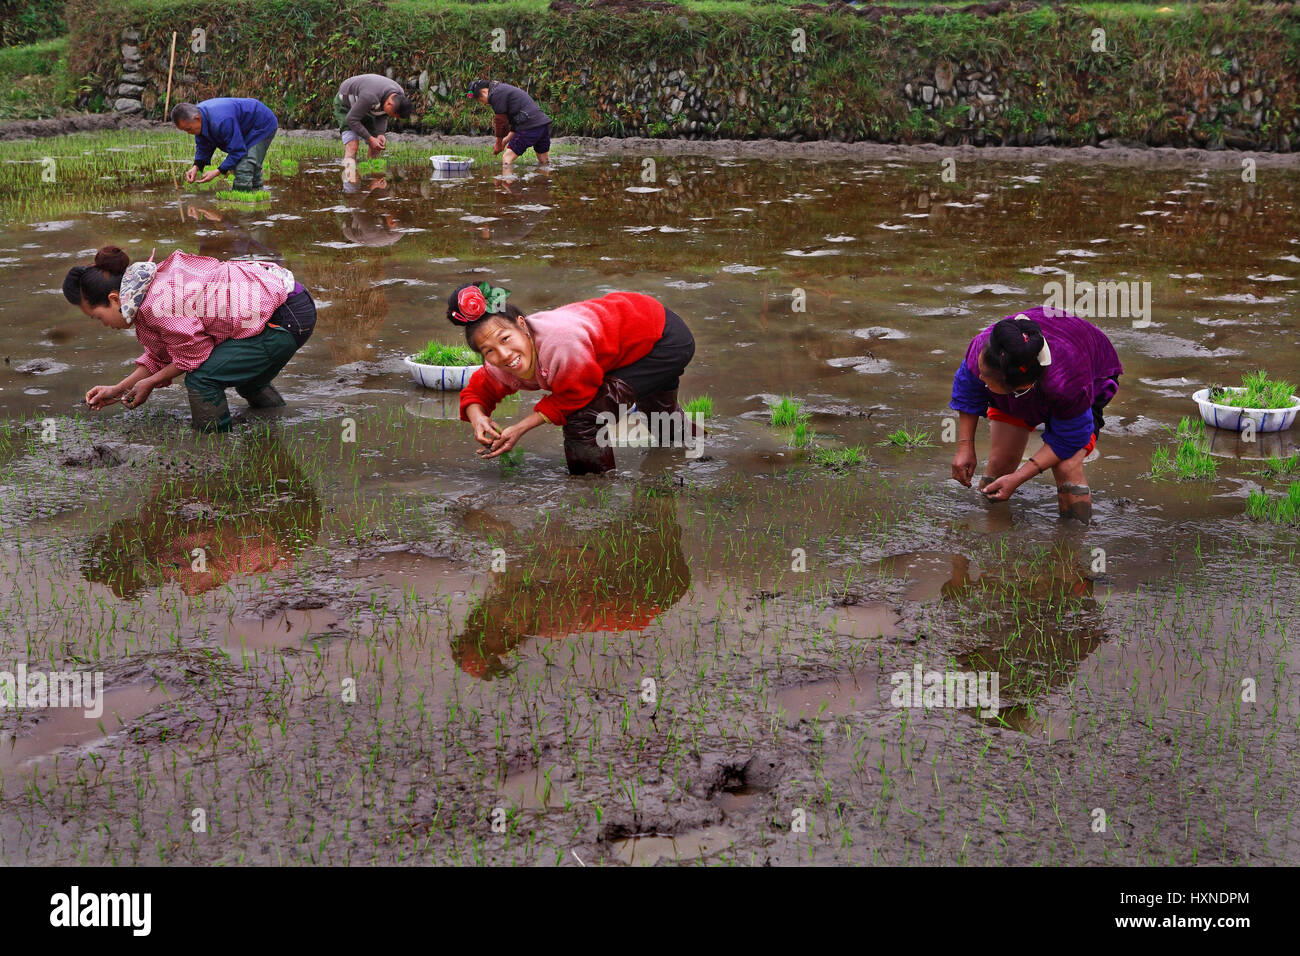 GUIZHOU, CHINA - APRIL 18: The peasant farm in southwestern China, the spring field work, planting rice the rice fields, April 18, 2010. Agriculture a Stock Photo